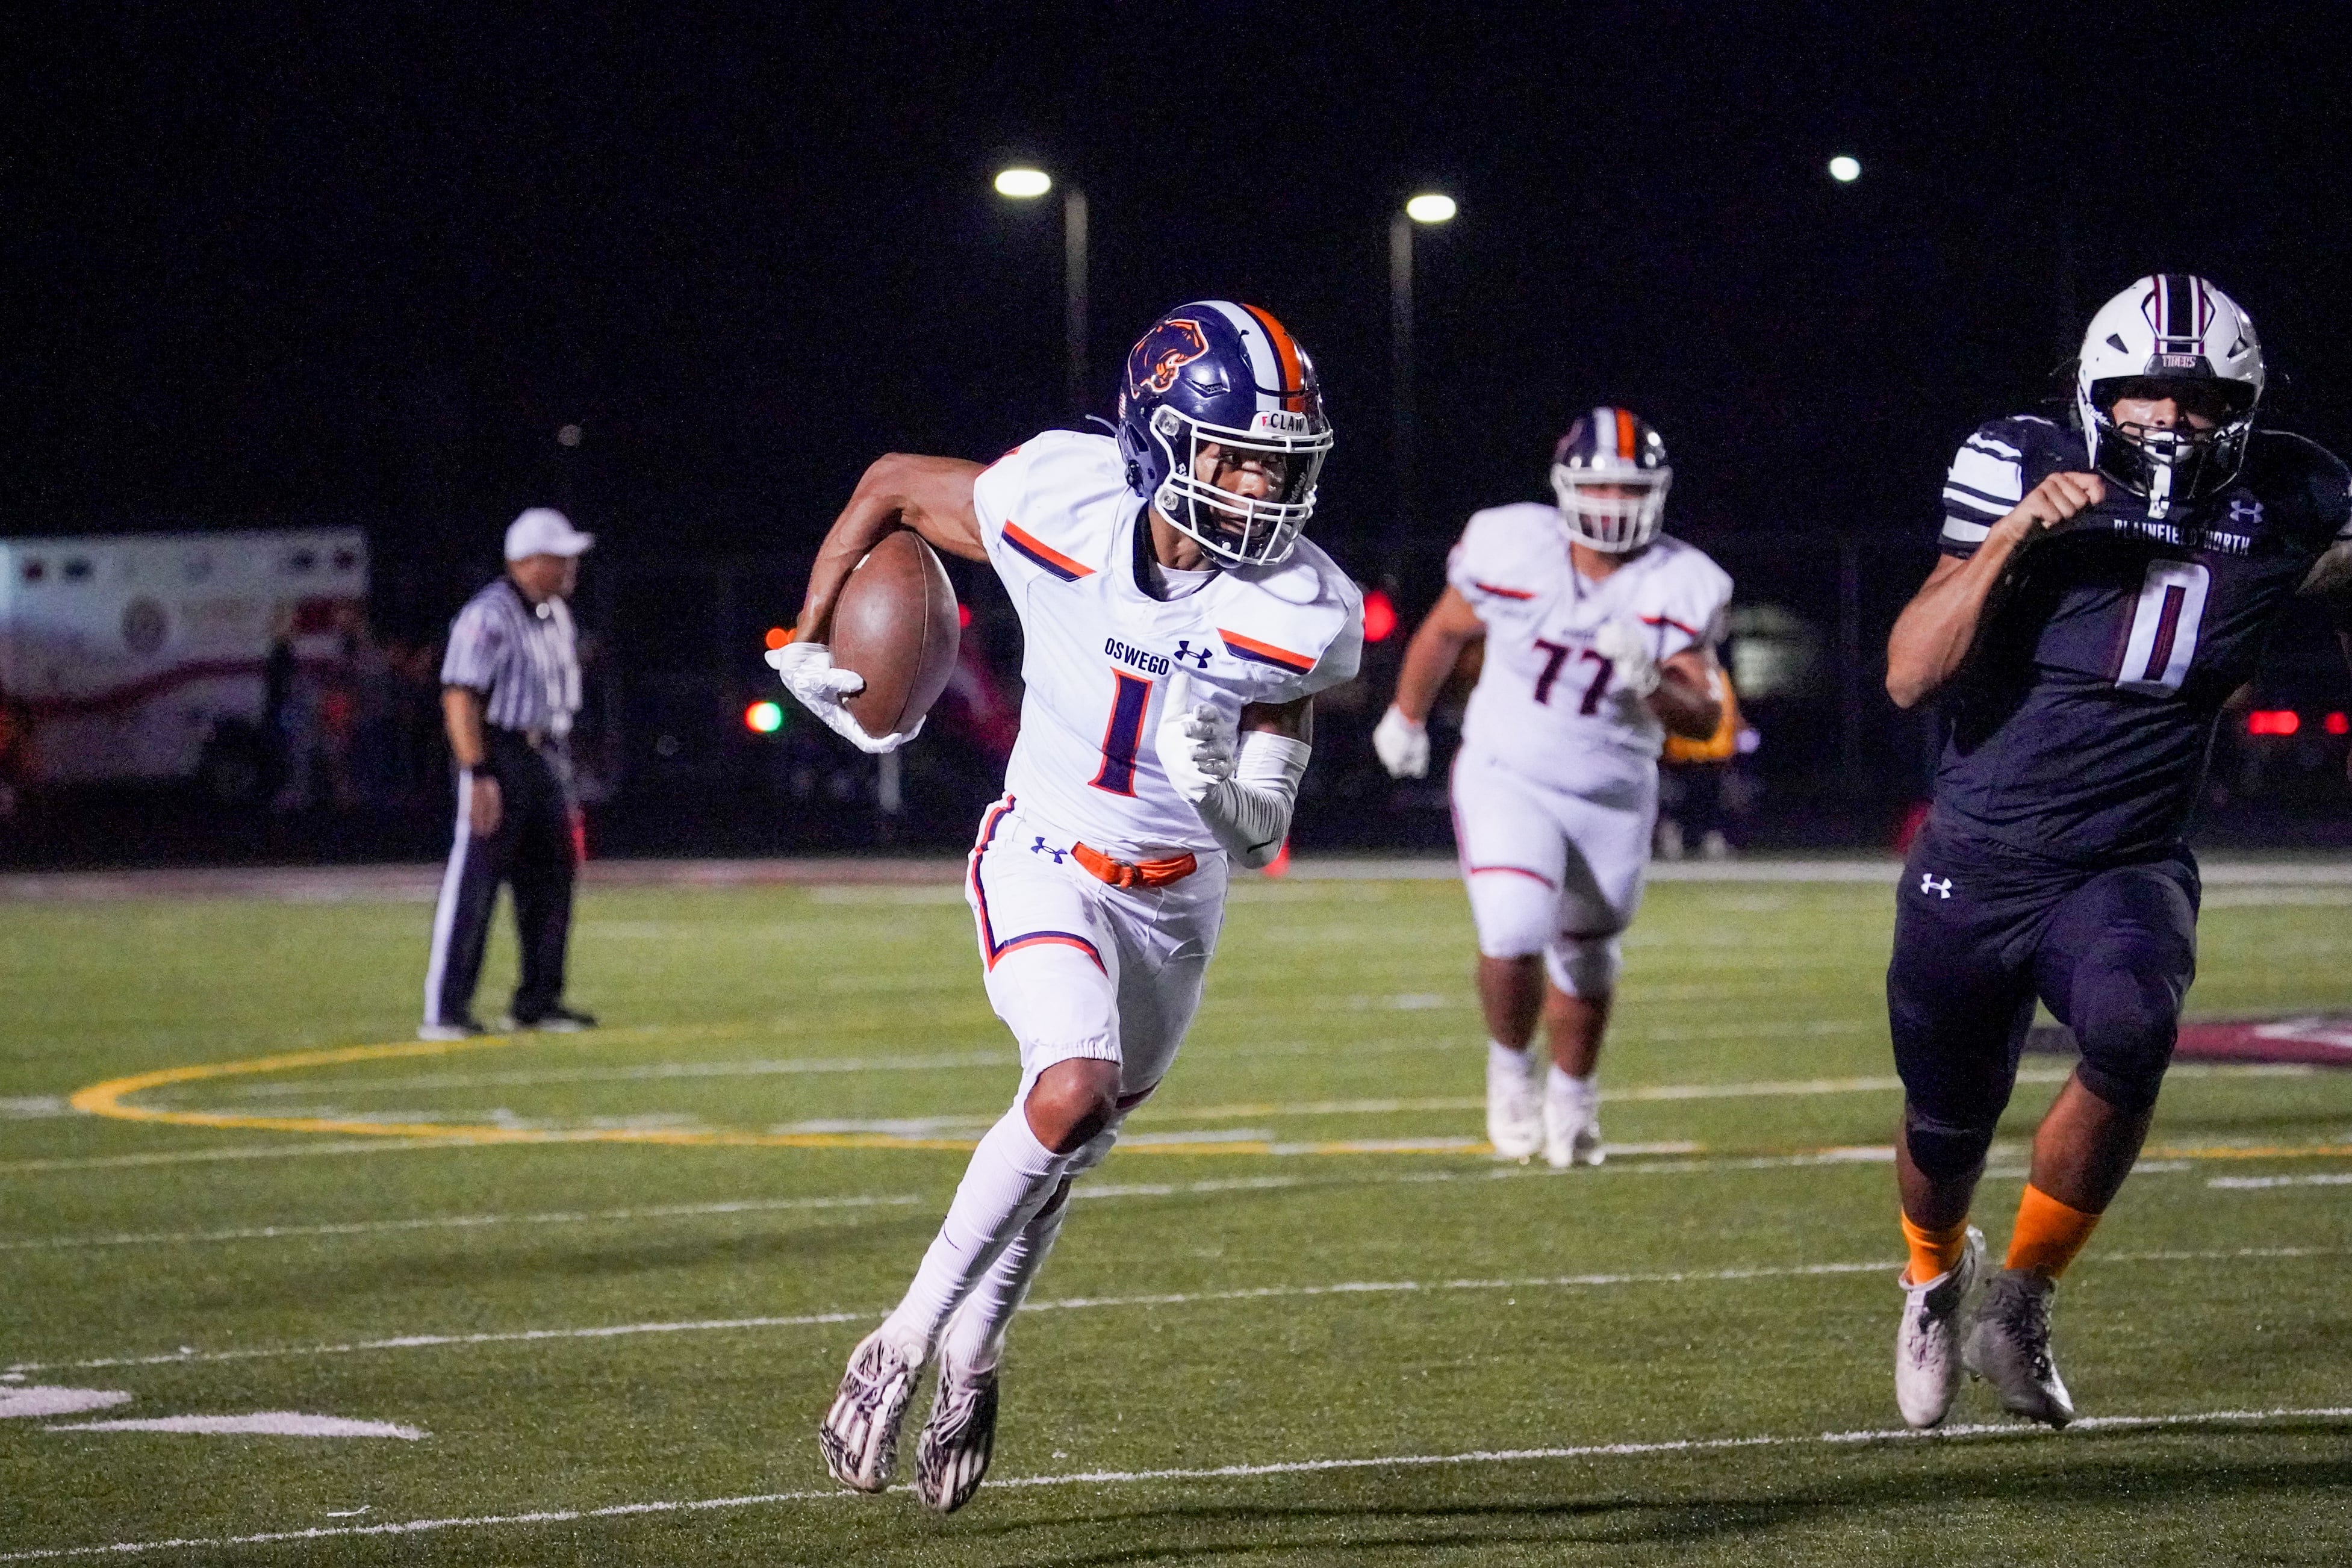 Oswego’s Jeremiah Cain, just committed to Northern Iowa, is quite a catch as big-play threat